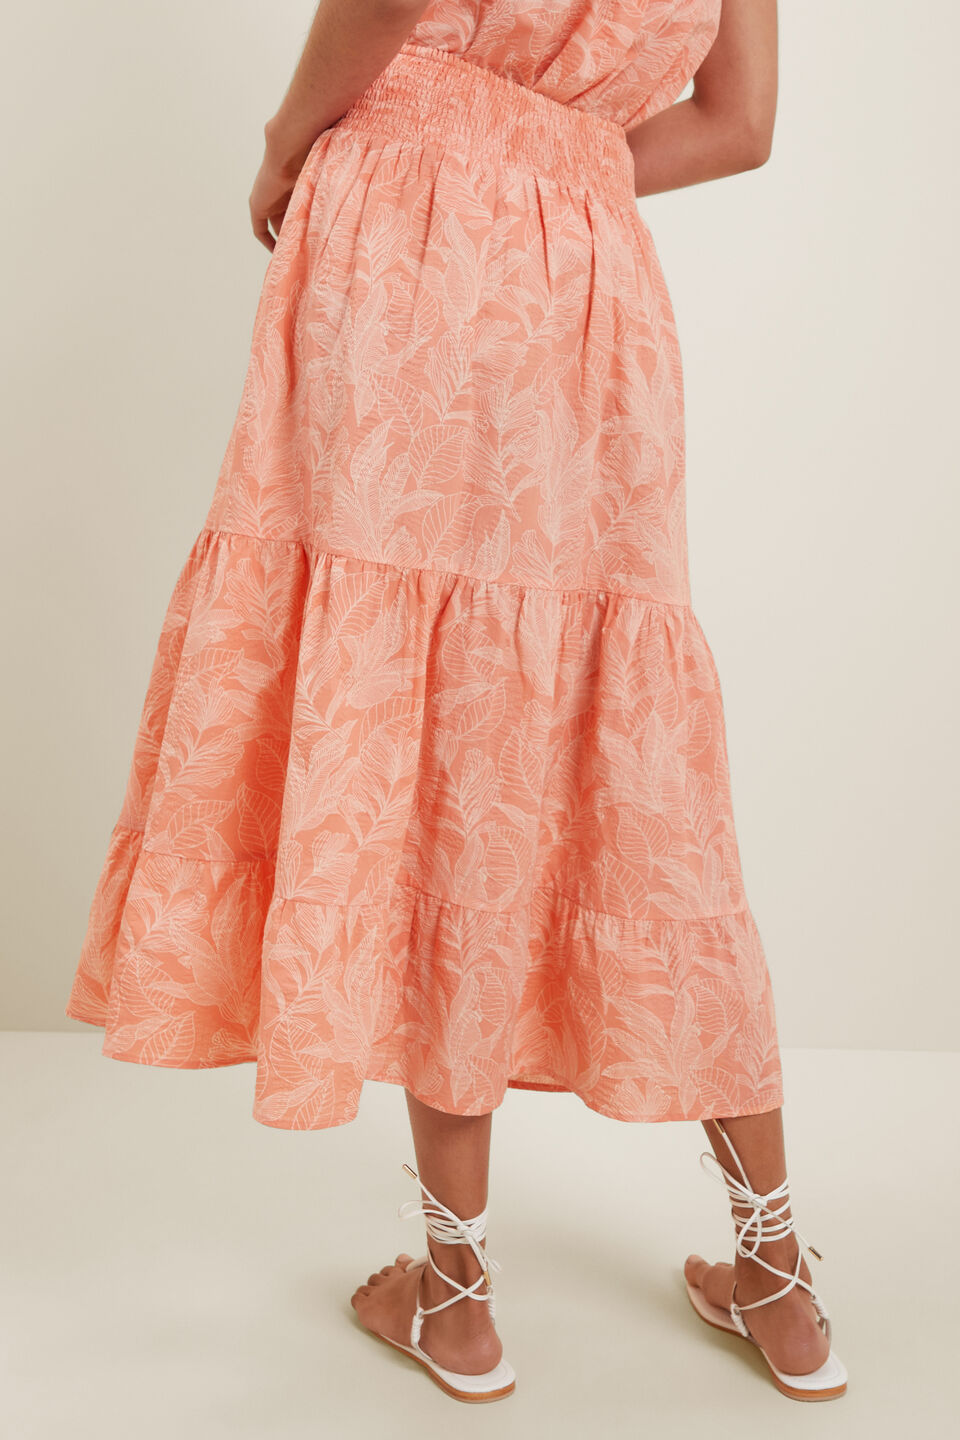 Textured Tiered Skirt  Coral Rose Floral